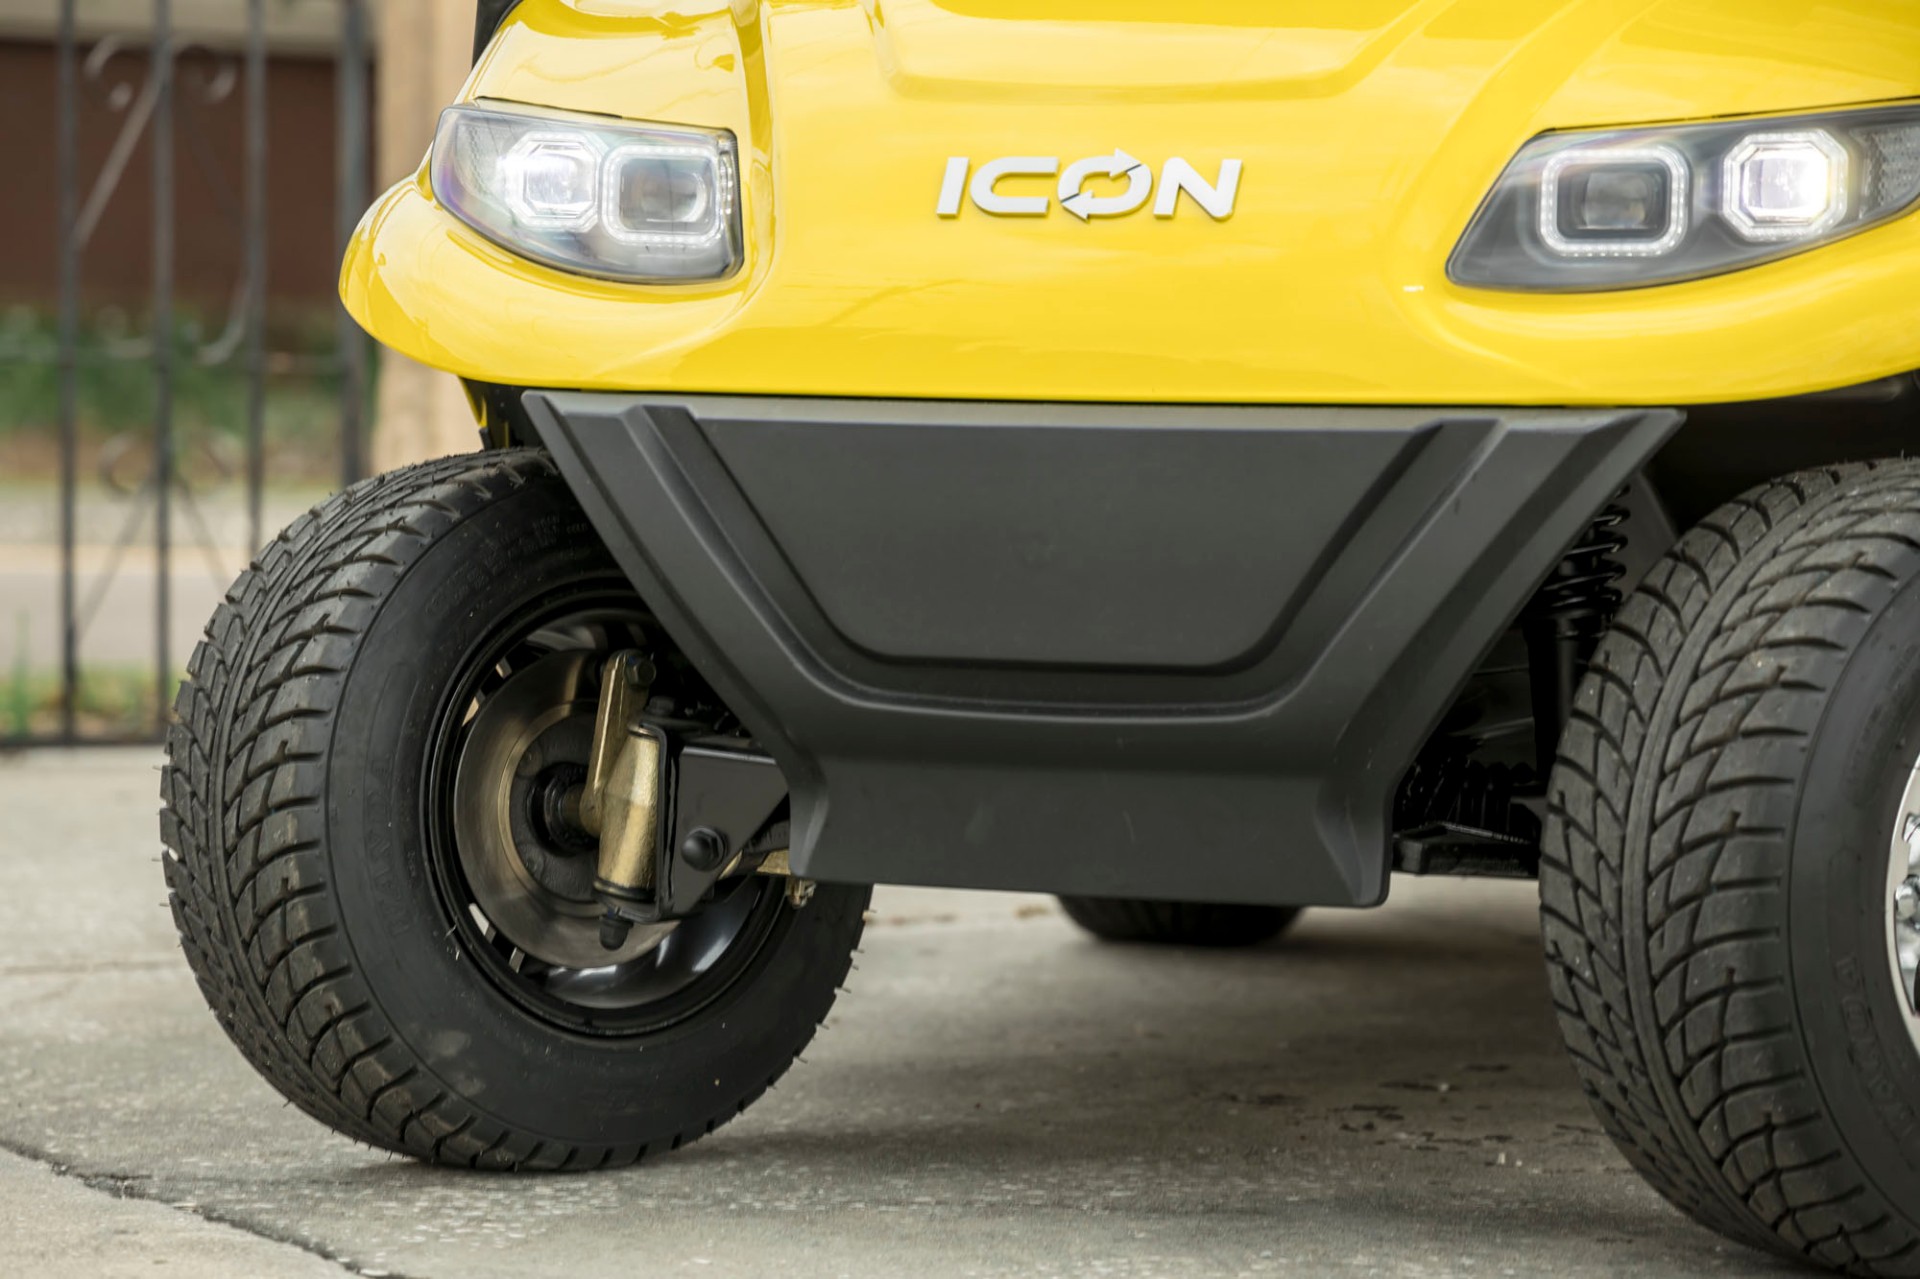 ICON Electric Vehicle golf carts